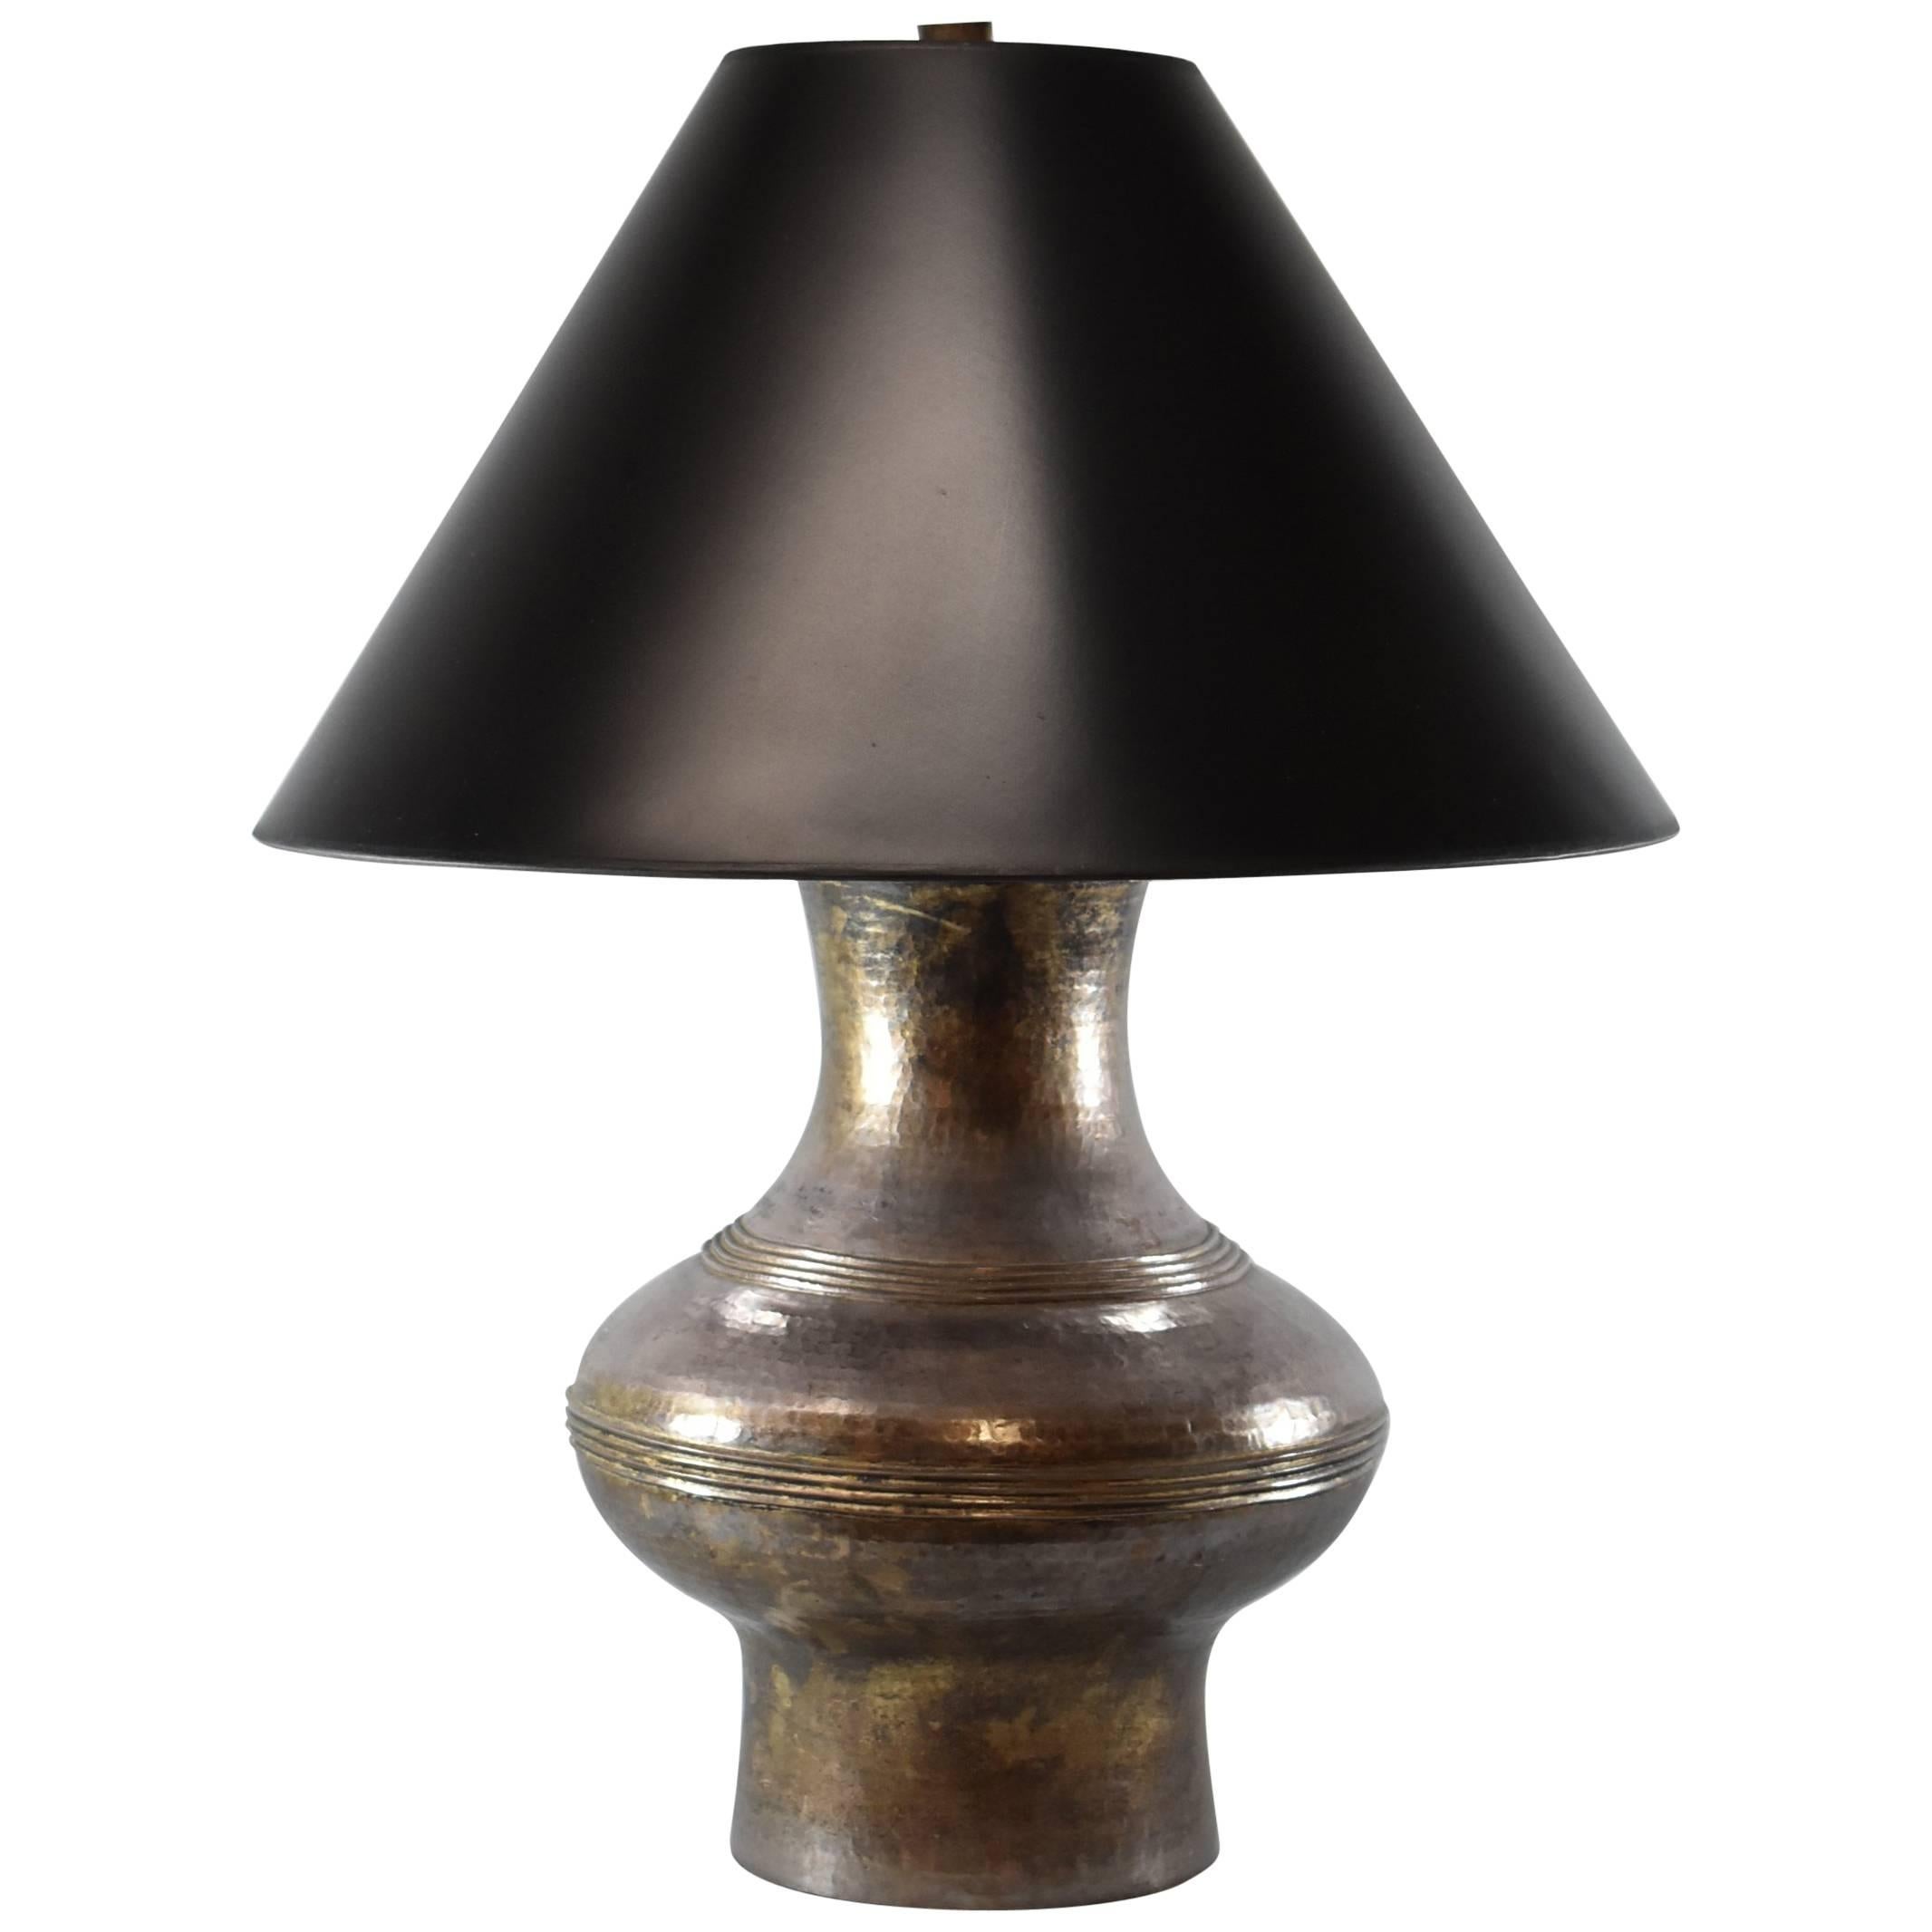 McGuire Table Lamp Hammered Brass Silvertone Patina